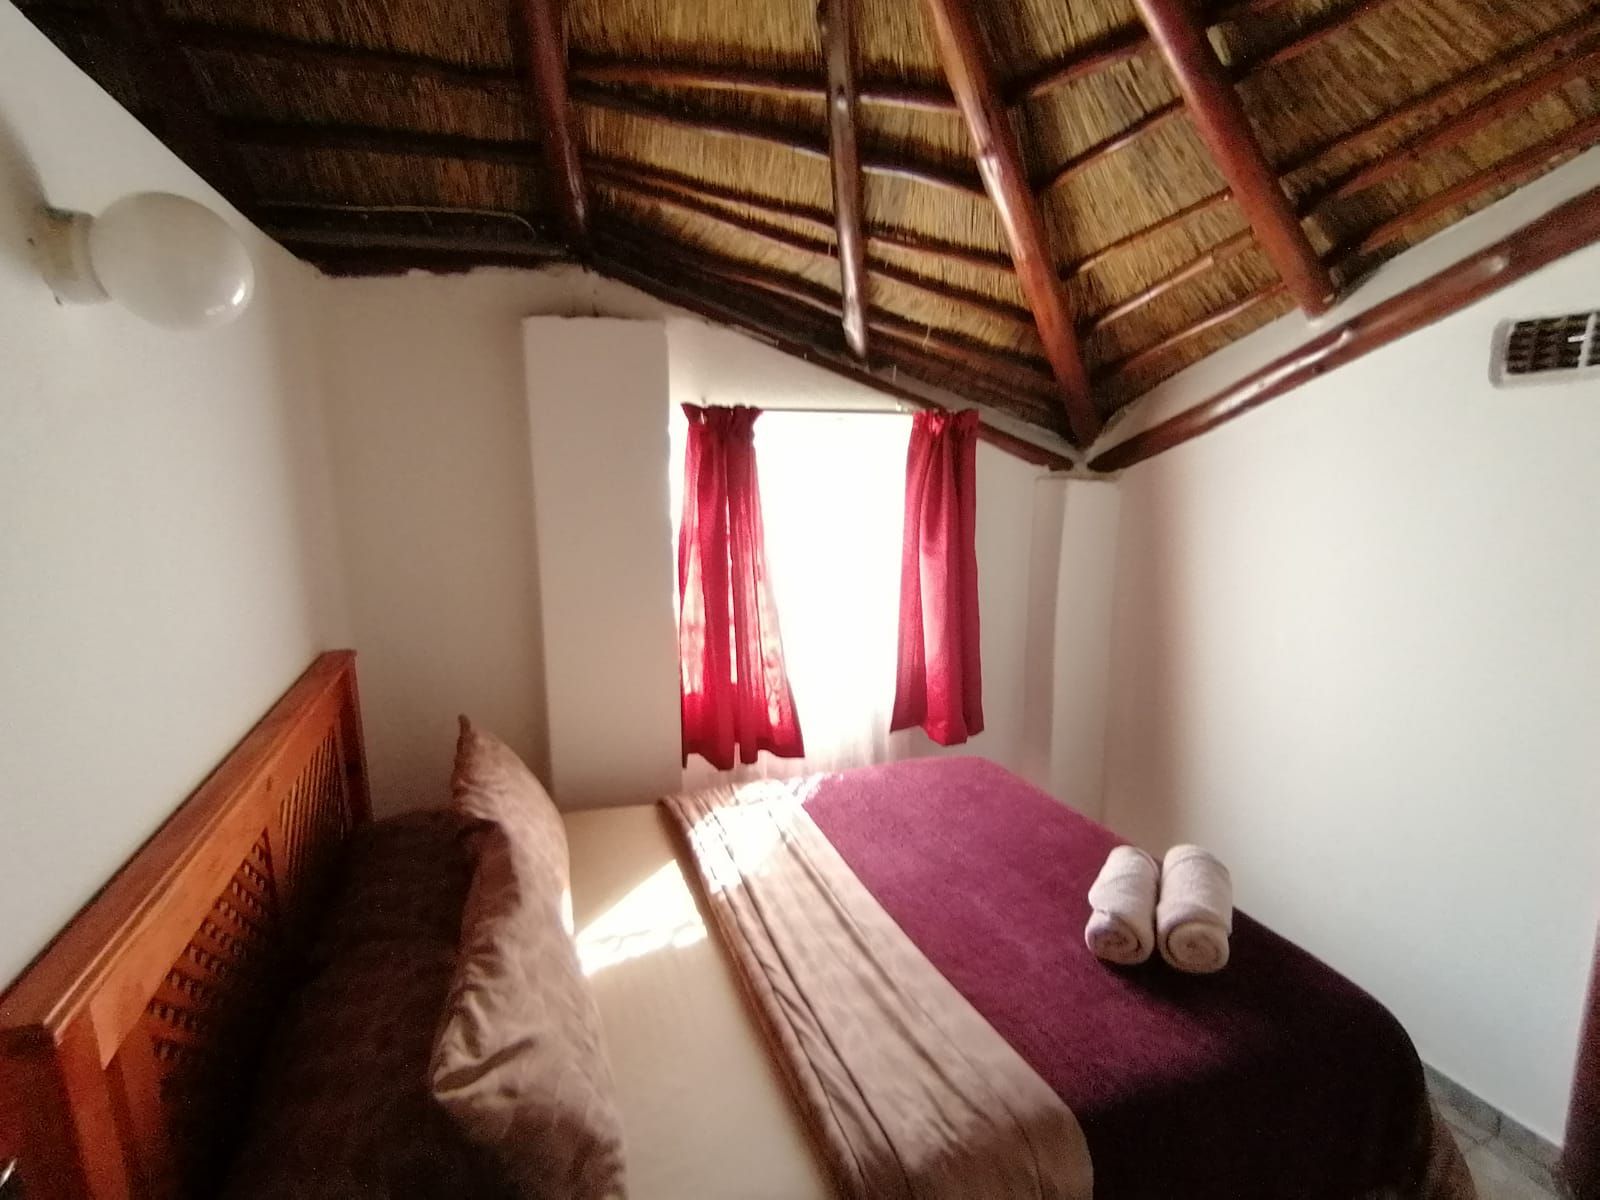 Woelwaters Holiday Resort Lindequesdrif Gauteng South Africa Bedroom